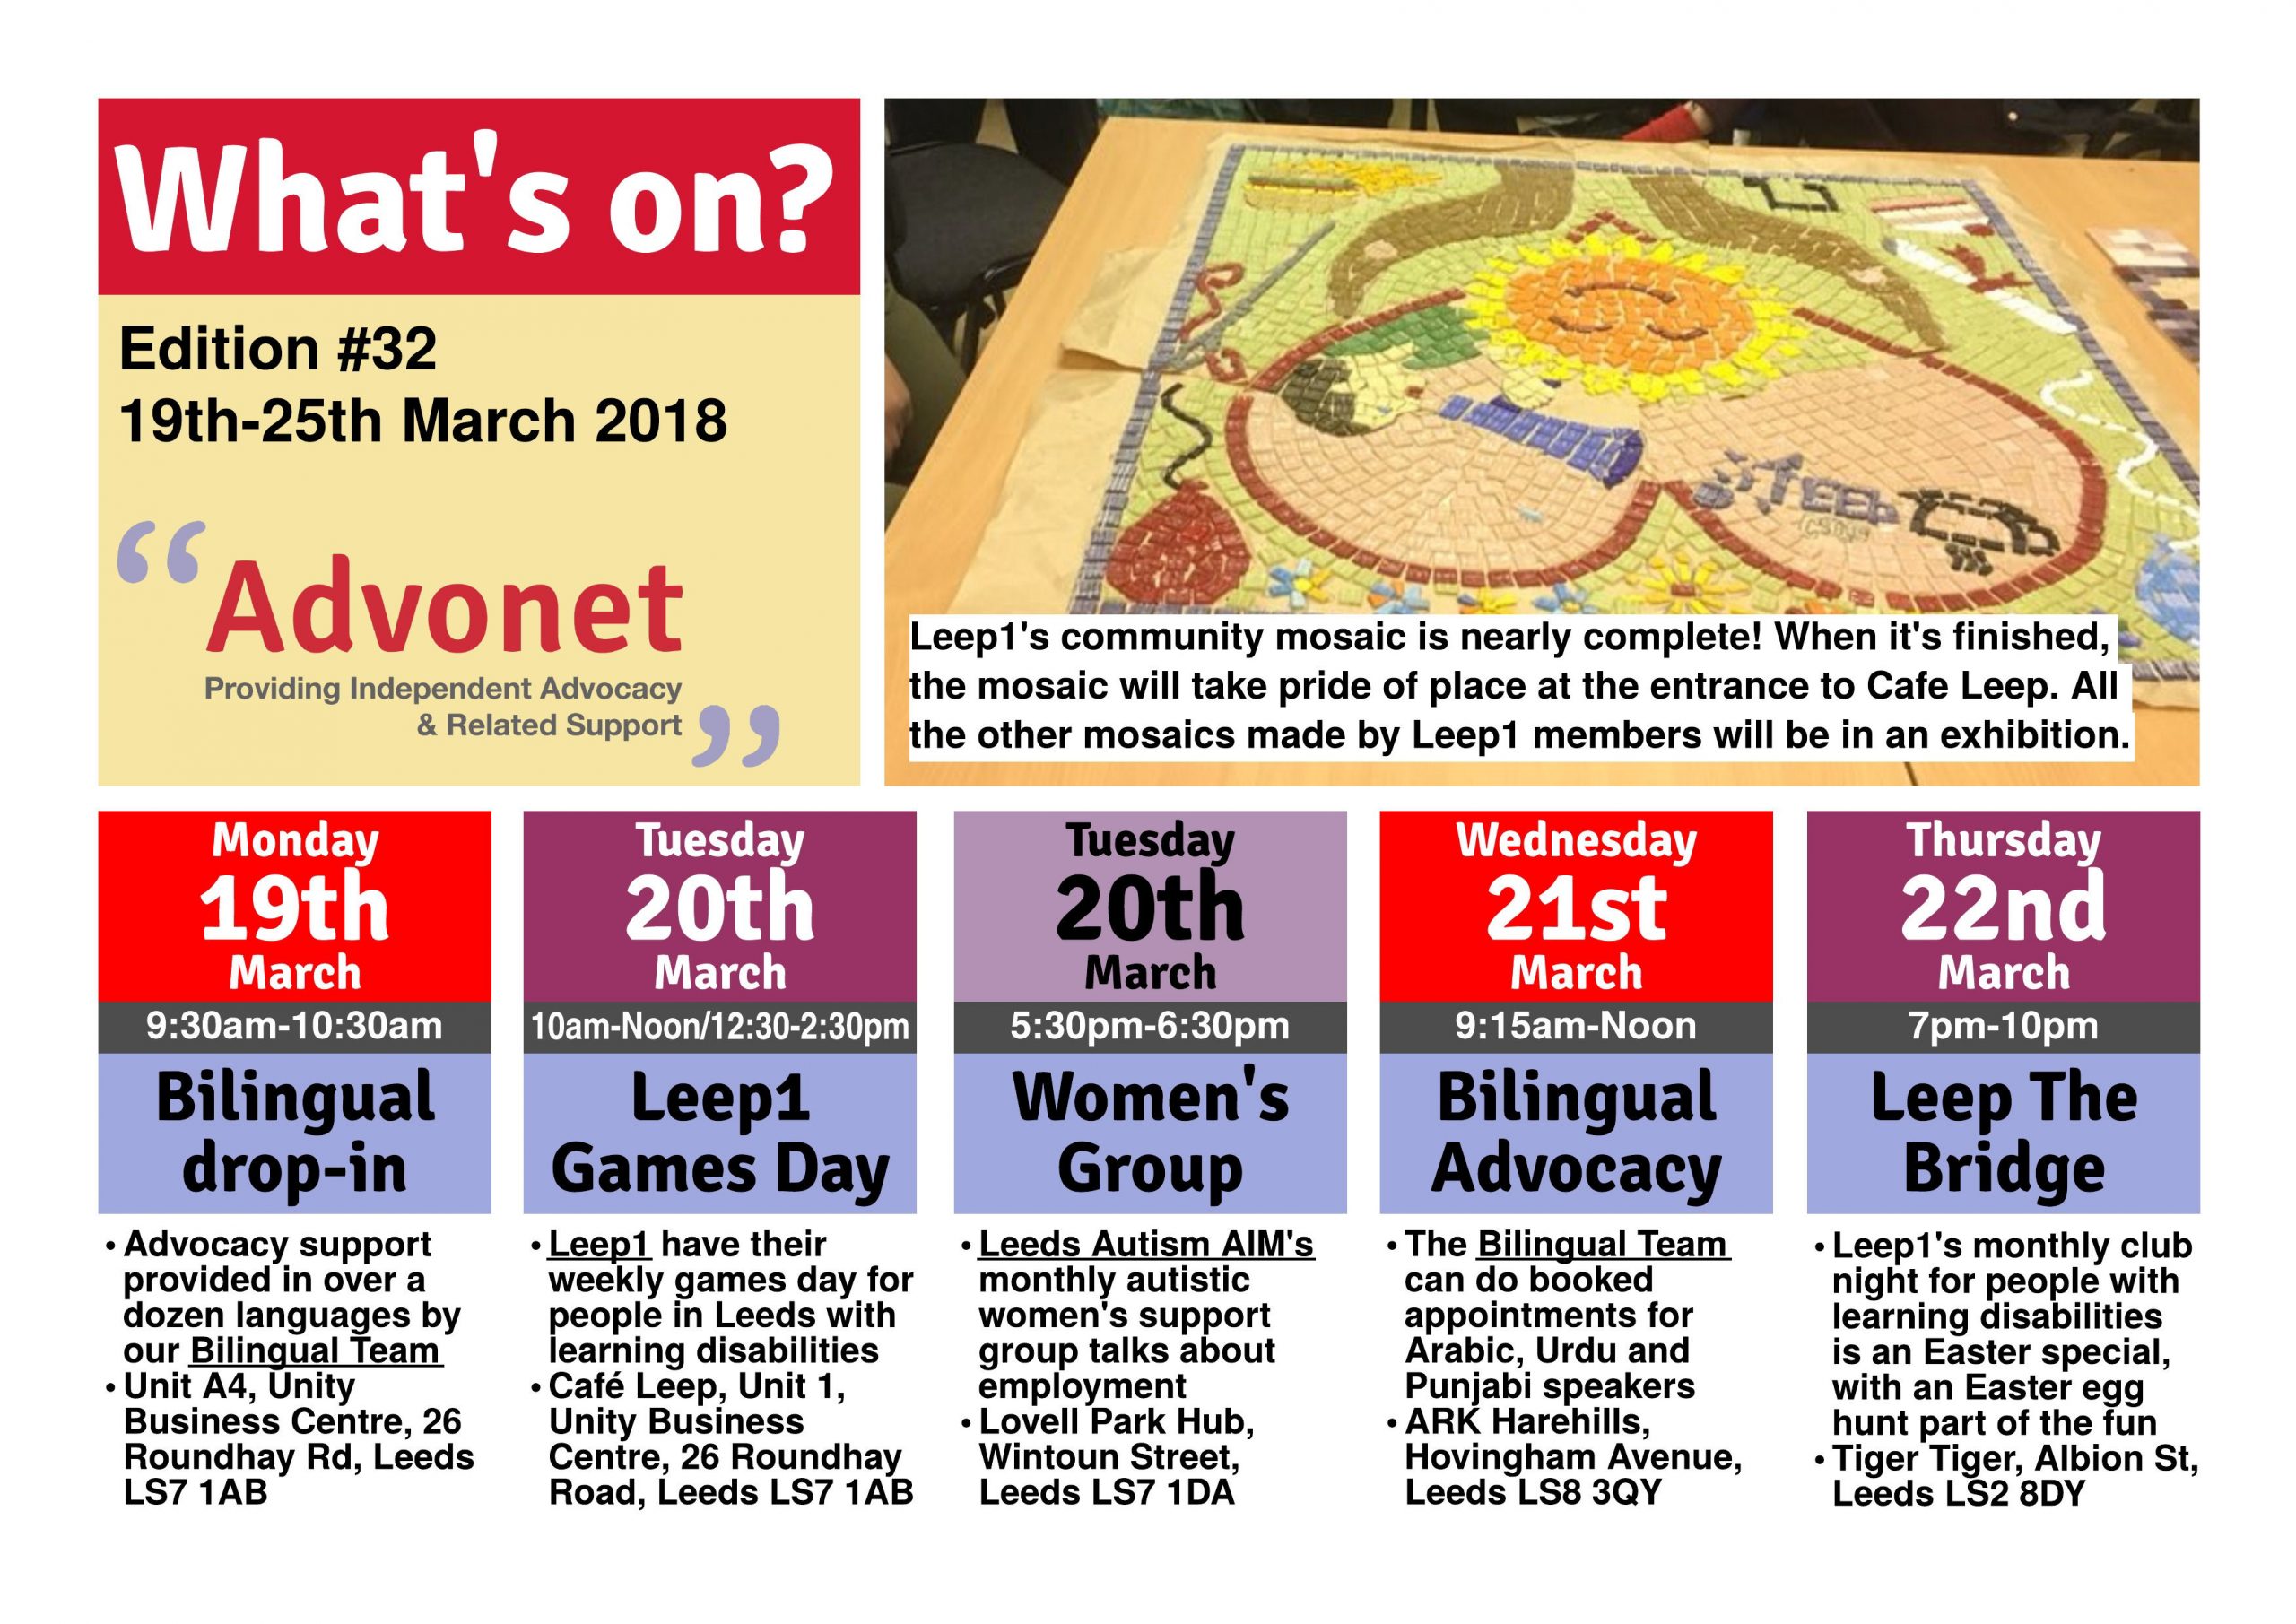 What's on 19-25 March